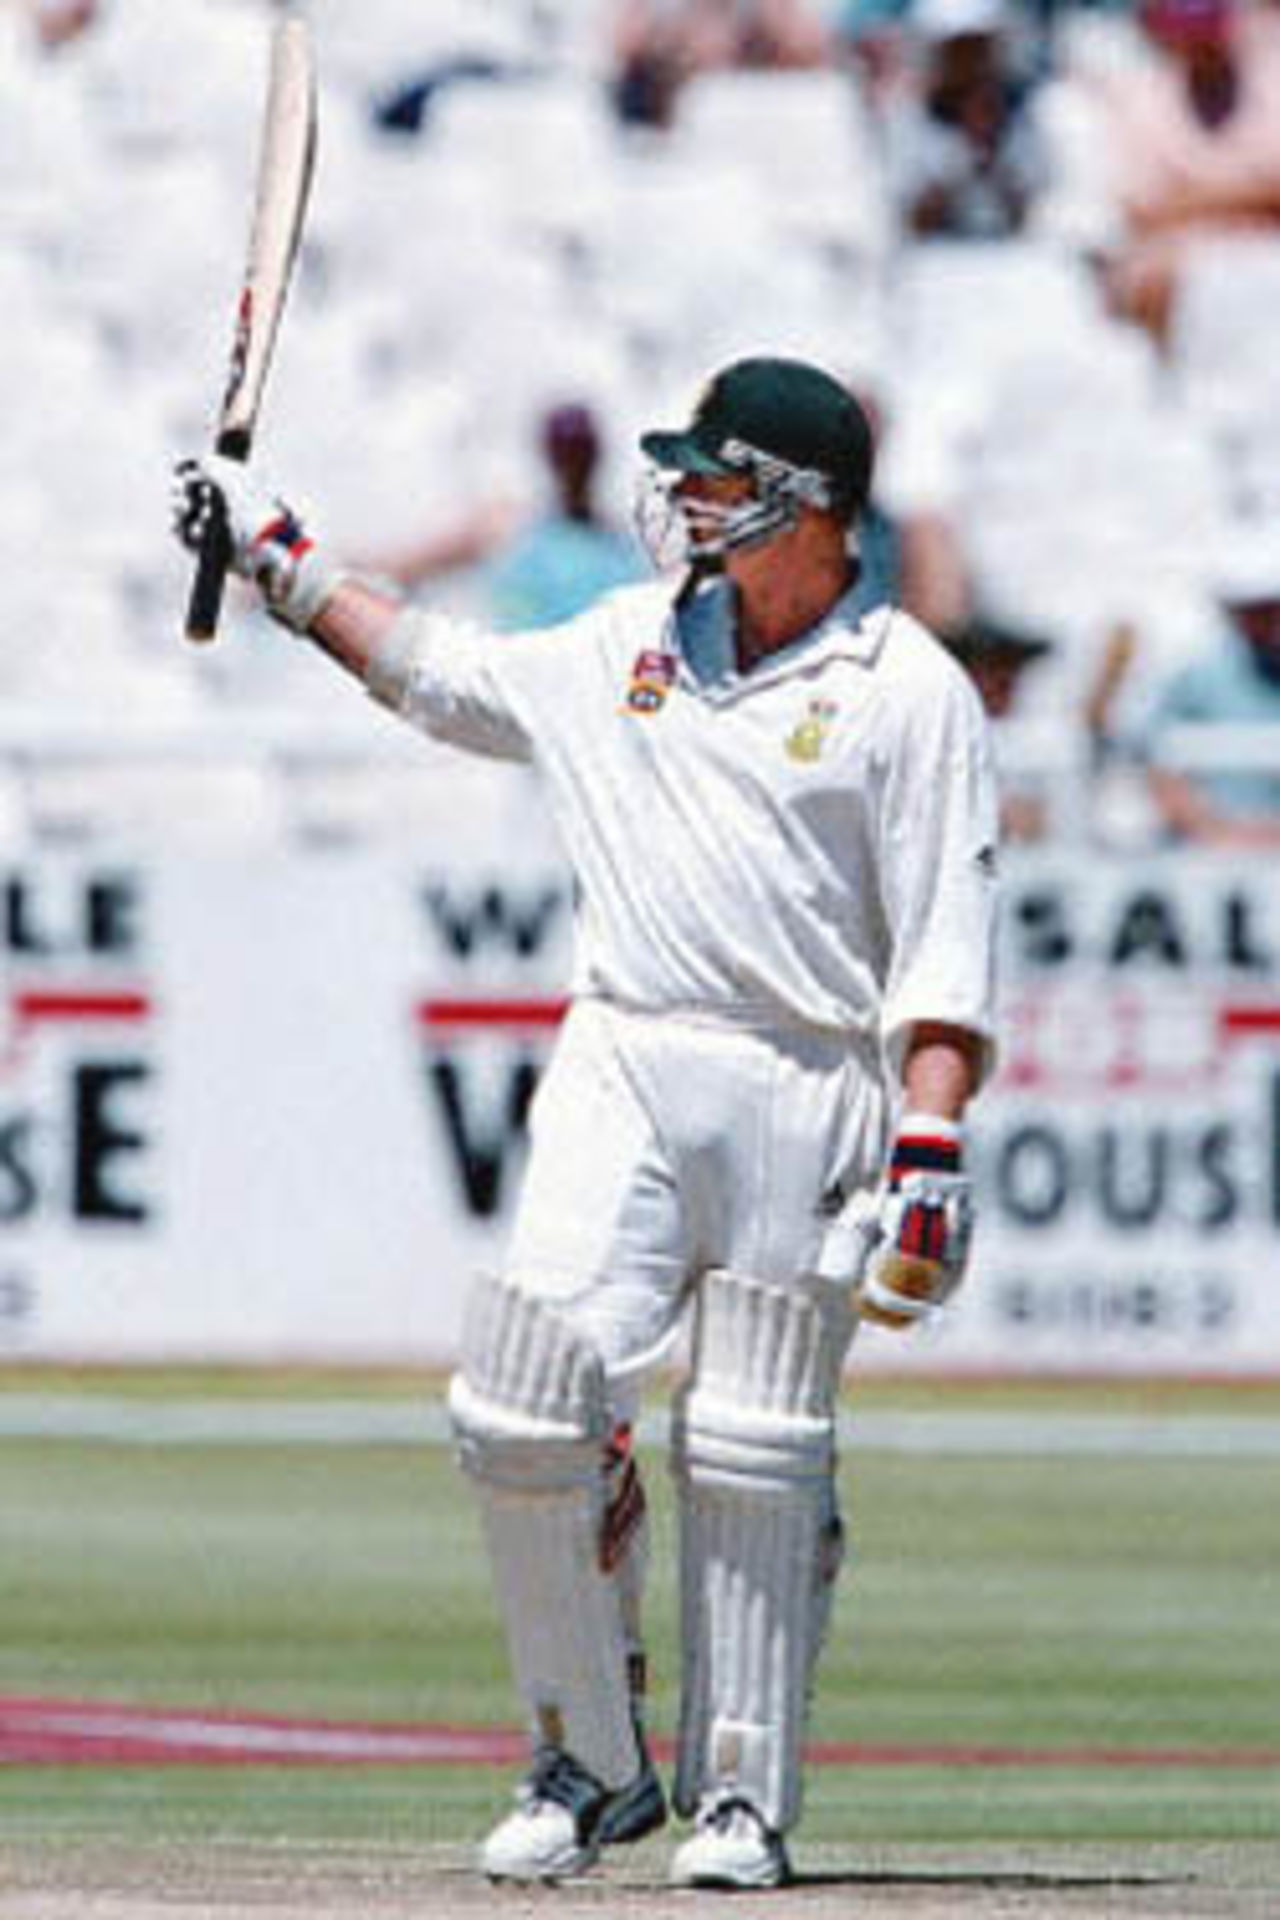 South African batsman Lance Klunser celebrates his 50 runs 04 January 2001 during the third day of the second test between South Africa and Sri Lanka played at the Newlands cricket ground in Cape Town.